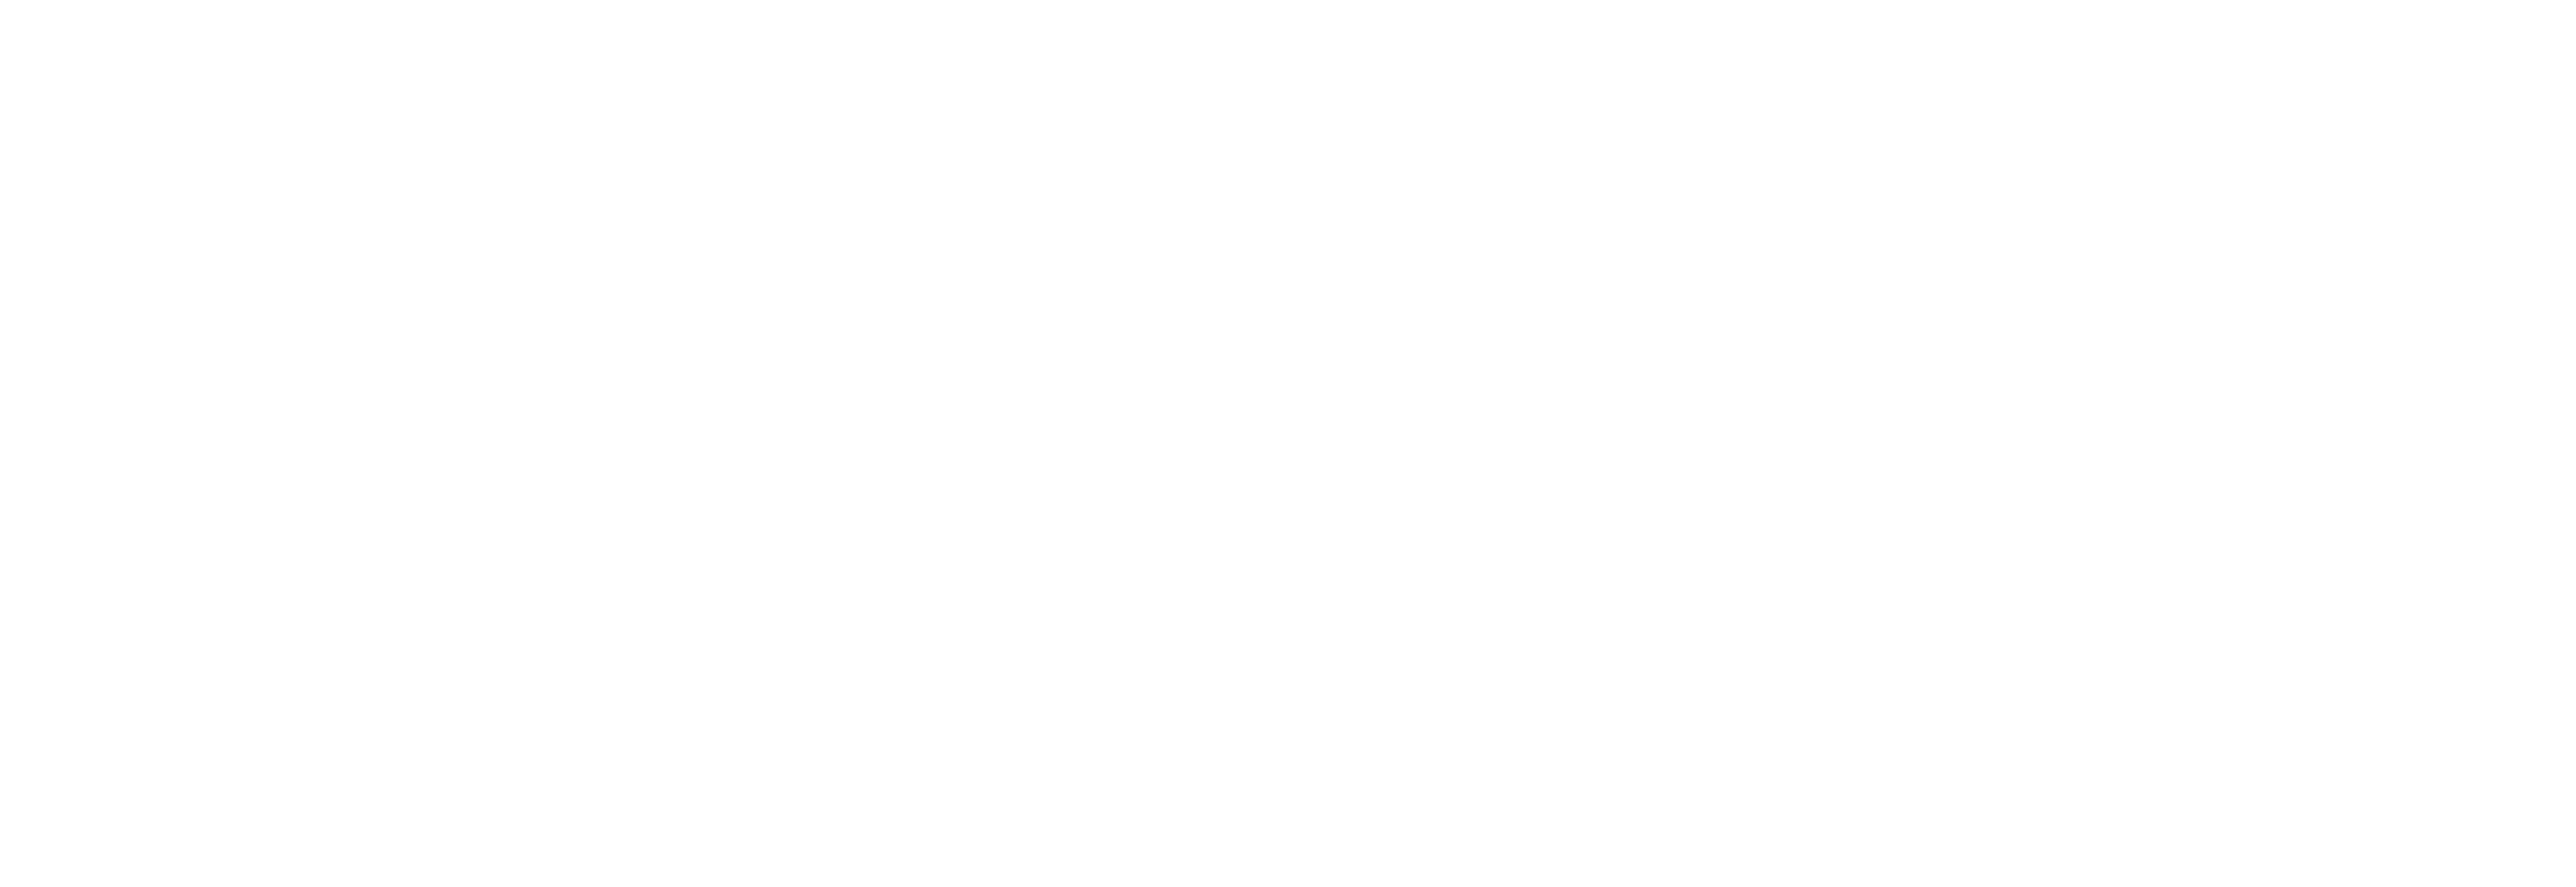 RBC Logo - Best Apartment Complexes Rotterdam NY - Developed by Richbell Capital